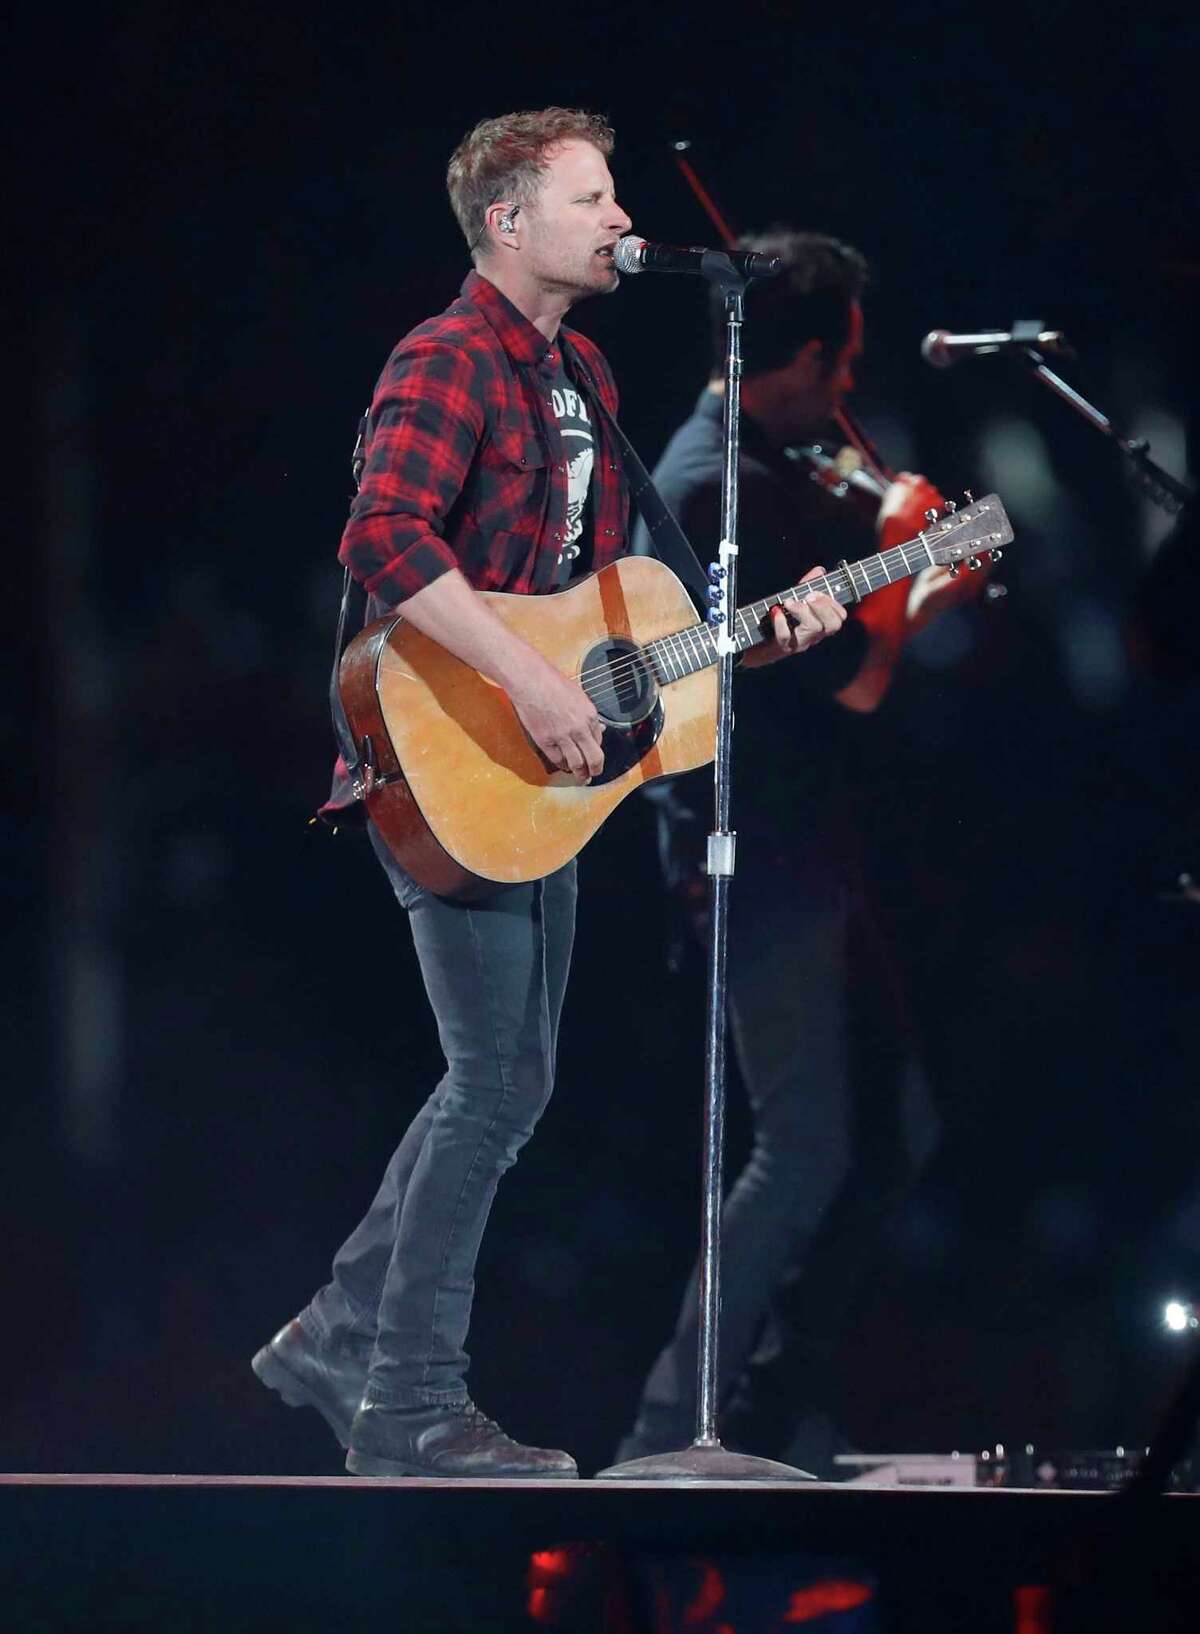 Dierks Bentley performs at the Houston Livestock Show and Rodeo at NRG Park, Friday, March 24, 2017, in Houston.